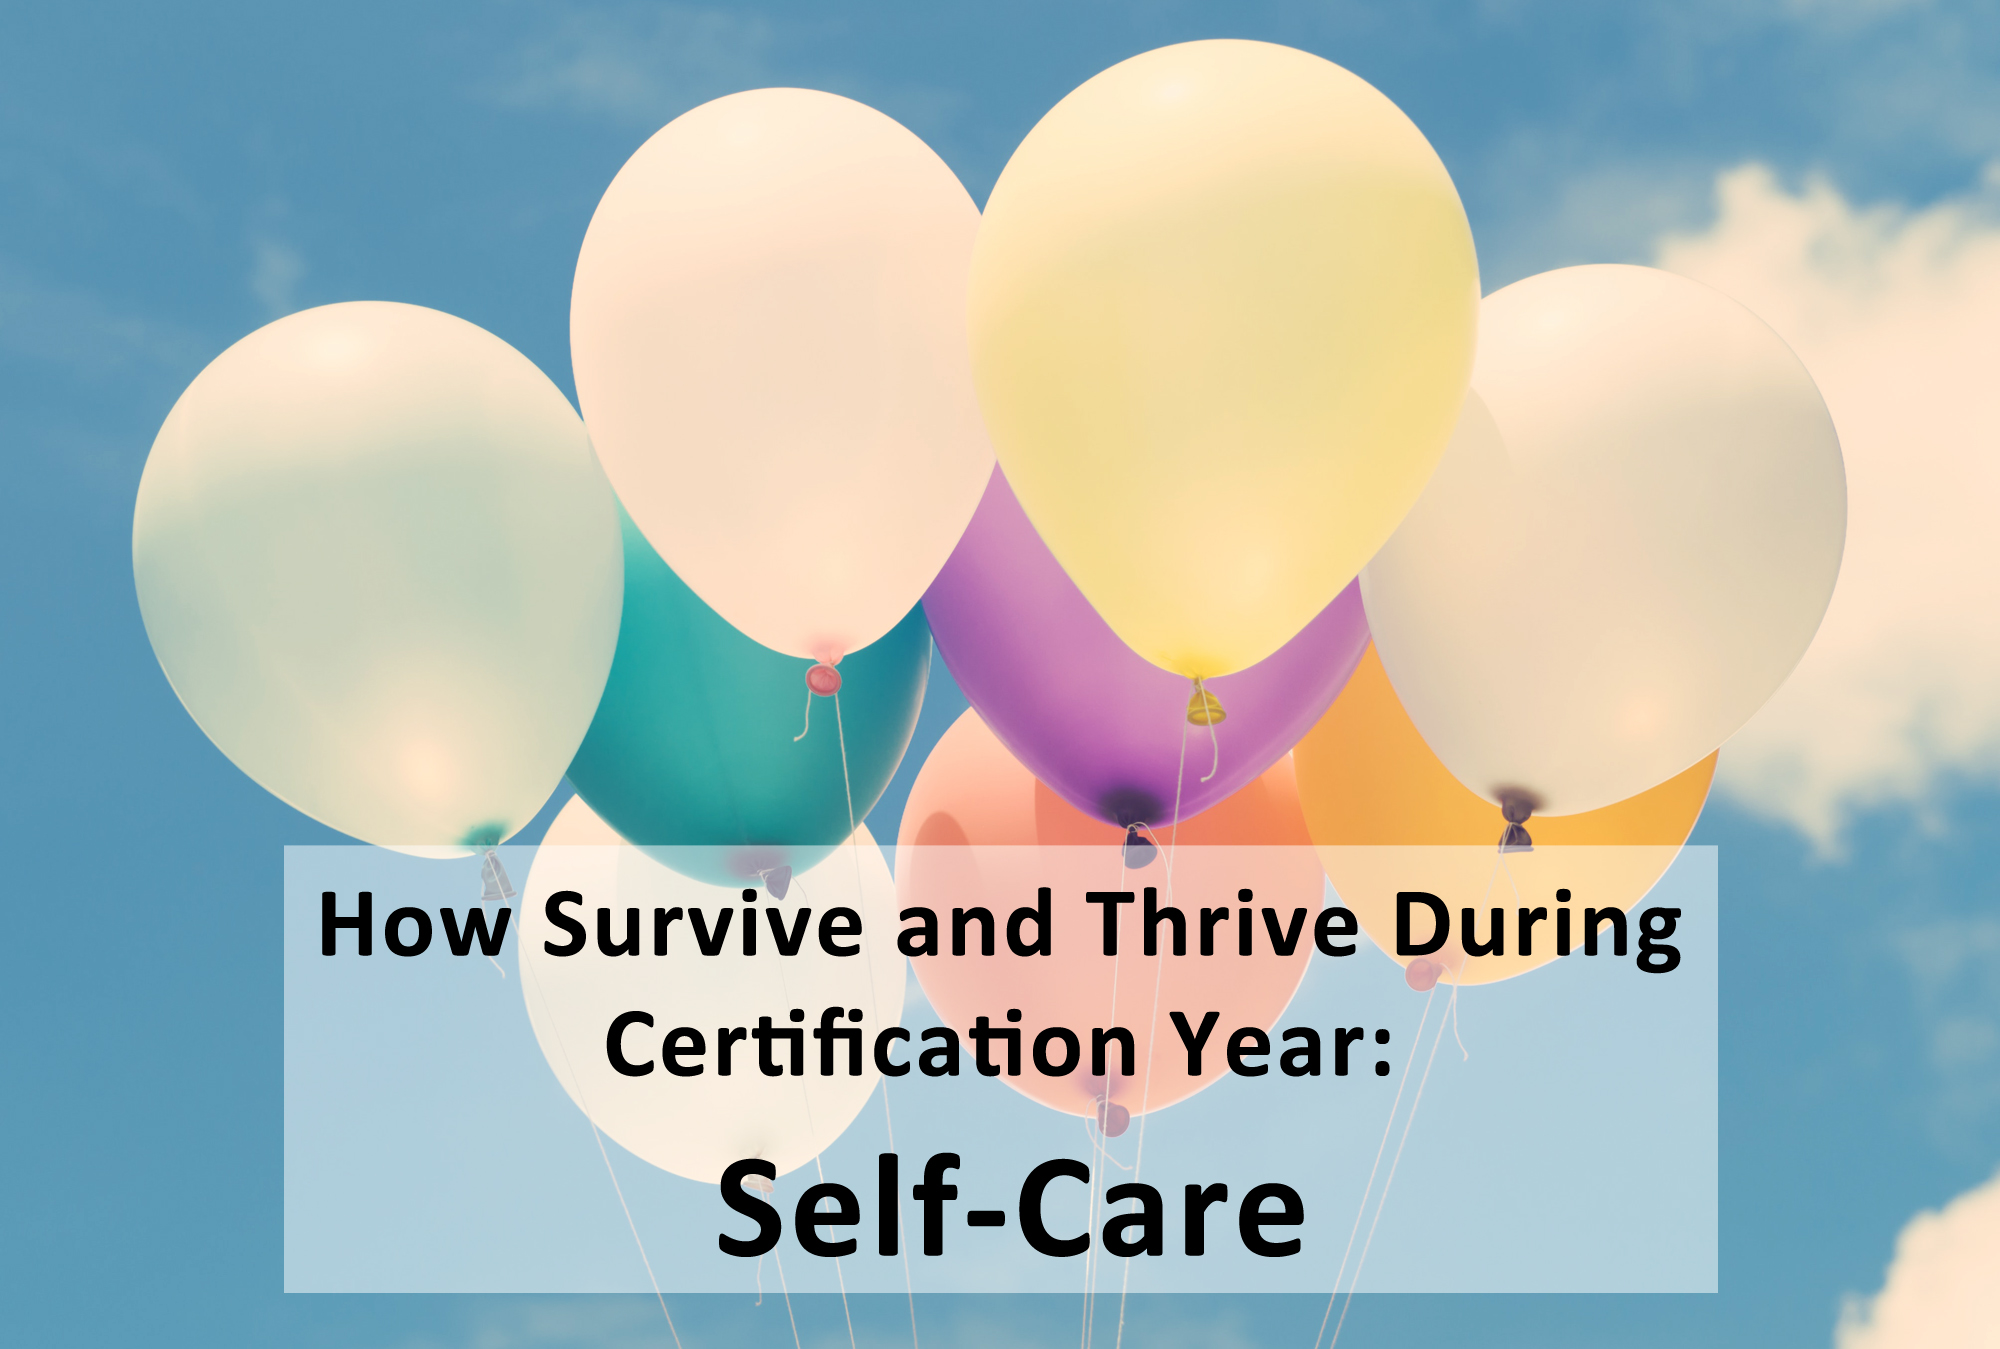 You are currently viewing How Survive and Thrive During Certification Year: Self-Care